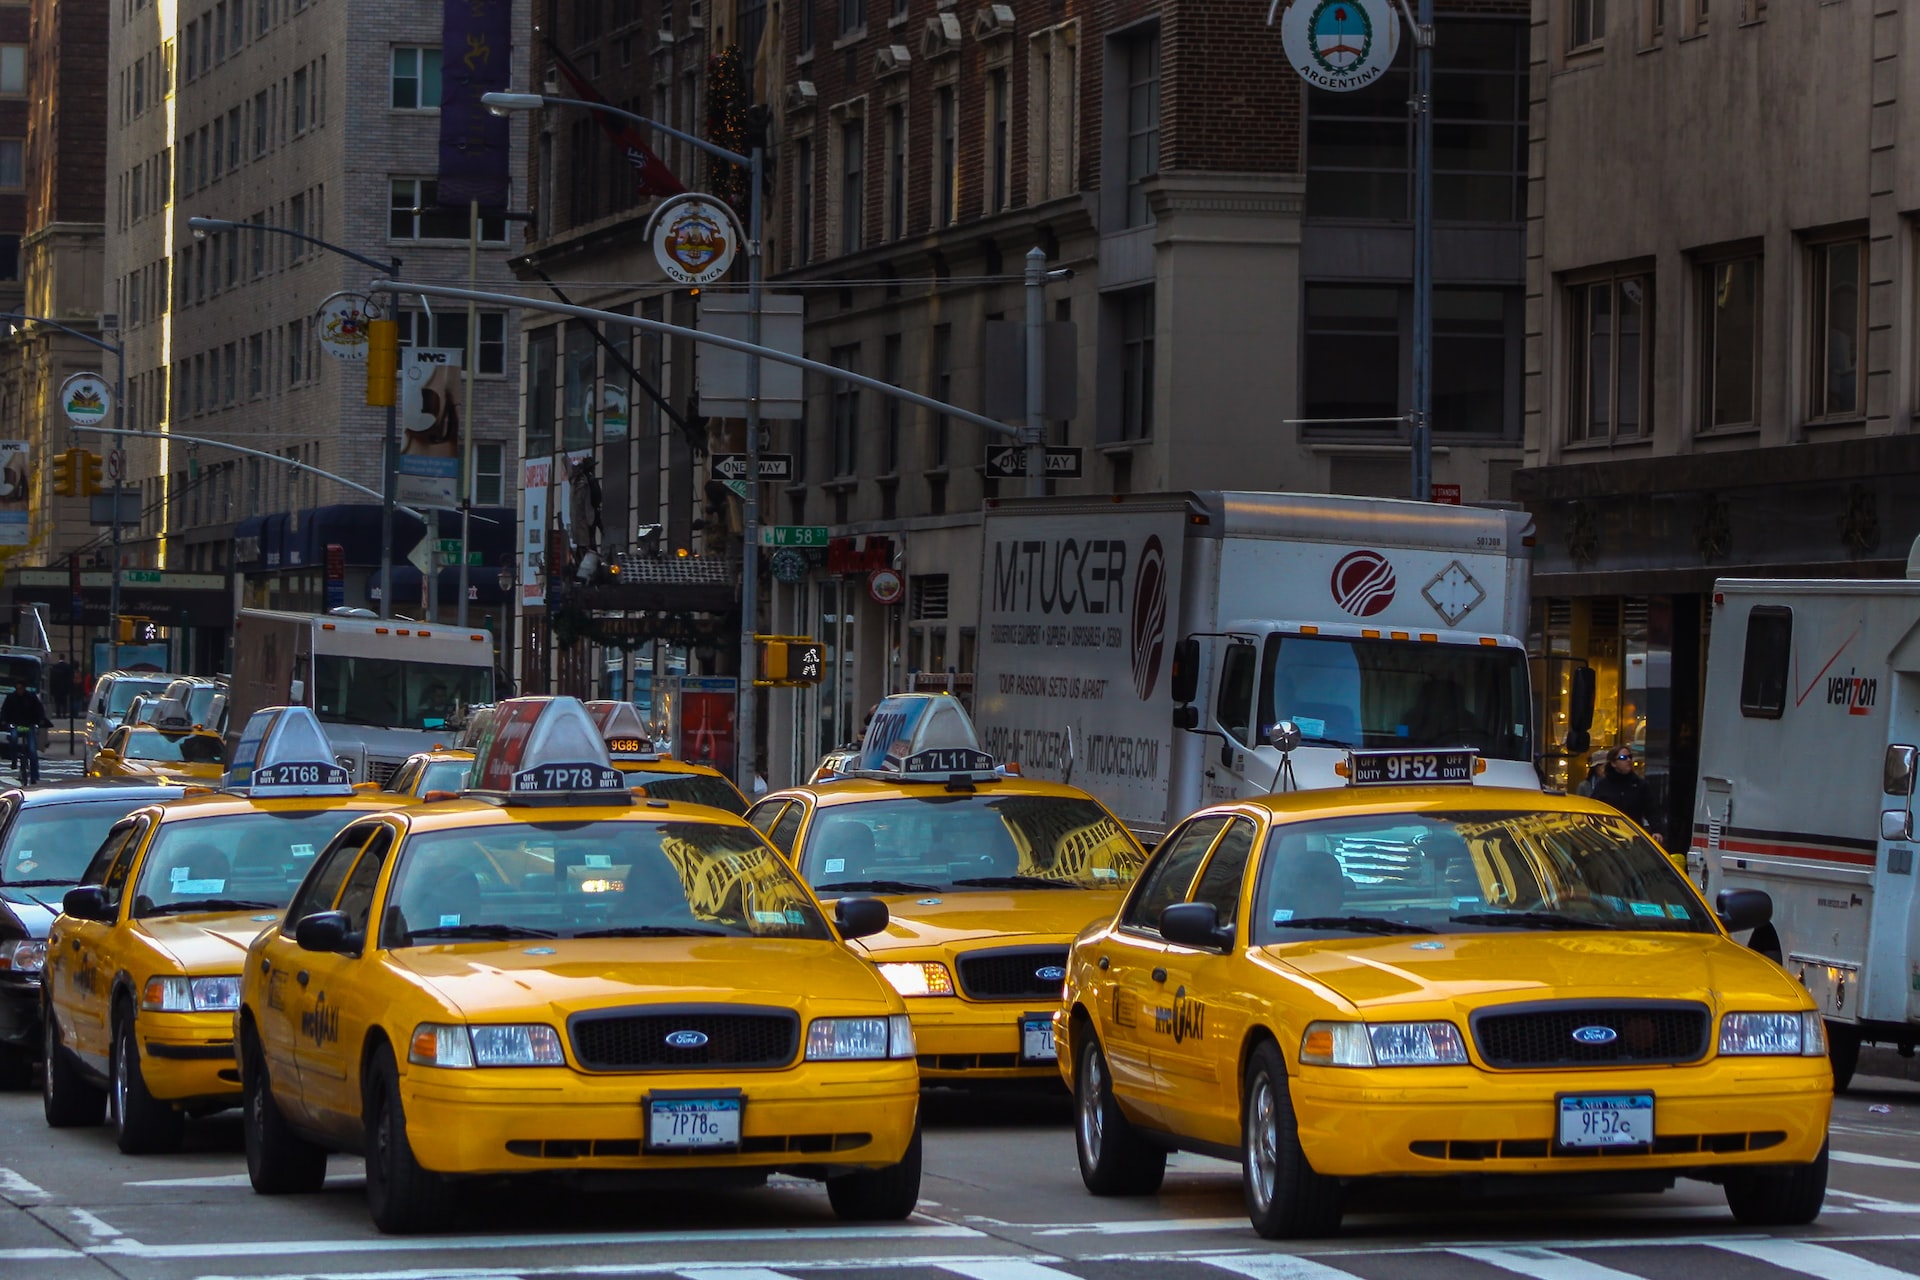 Four yellow taxis in New York City, stationary at a pedestrian crossing.